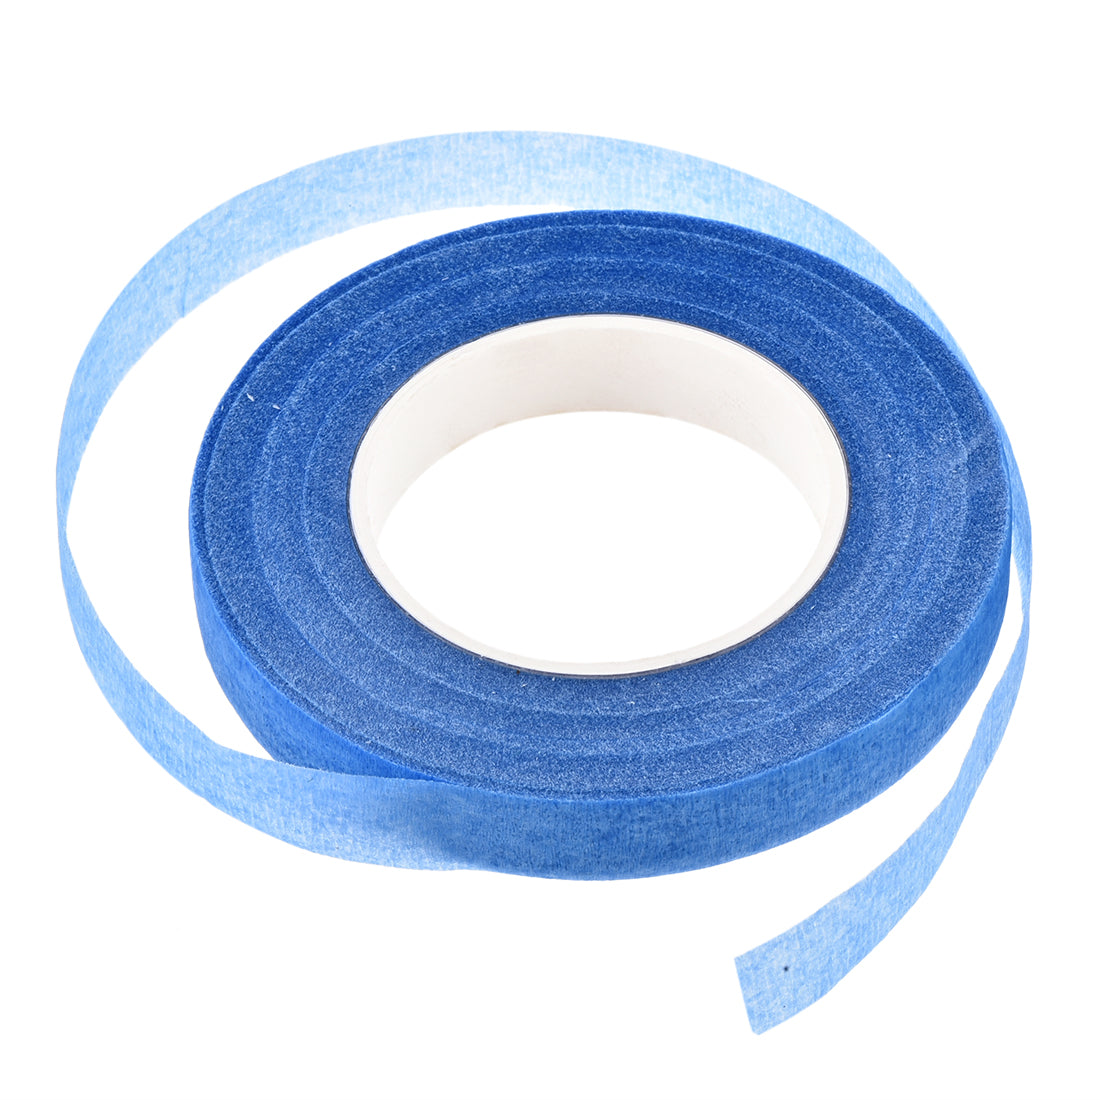 uxcell Uxcell 1Roll 1/2"x30Yard Blue Floral Tape Flower Adhesives Floral Arrangement Kit